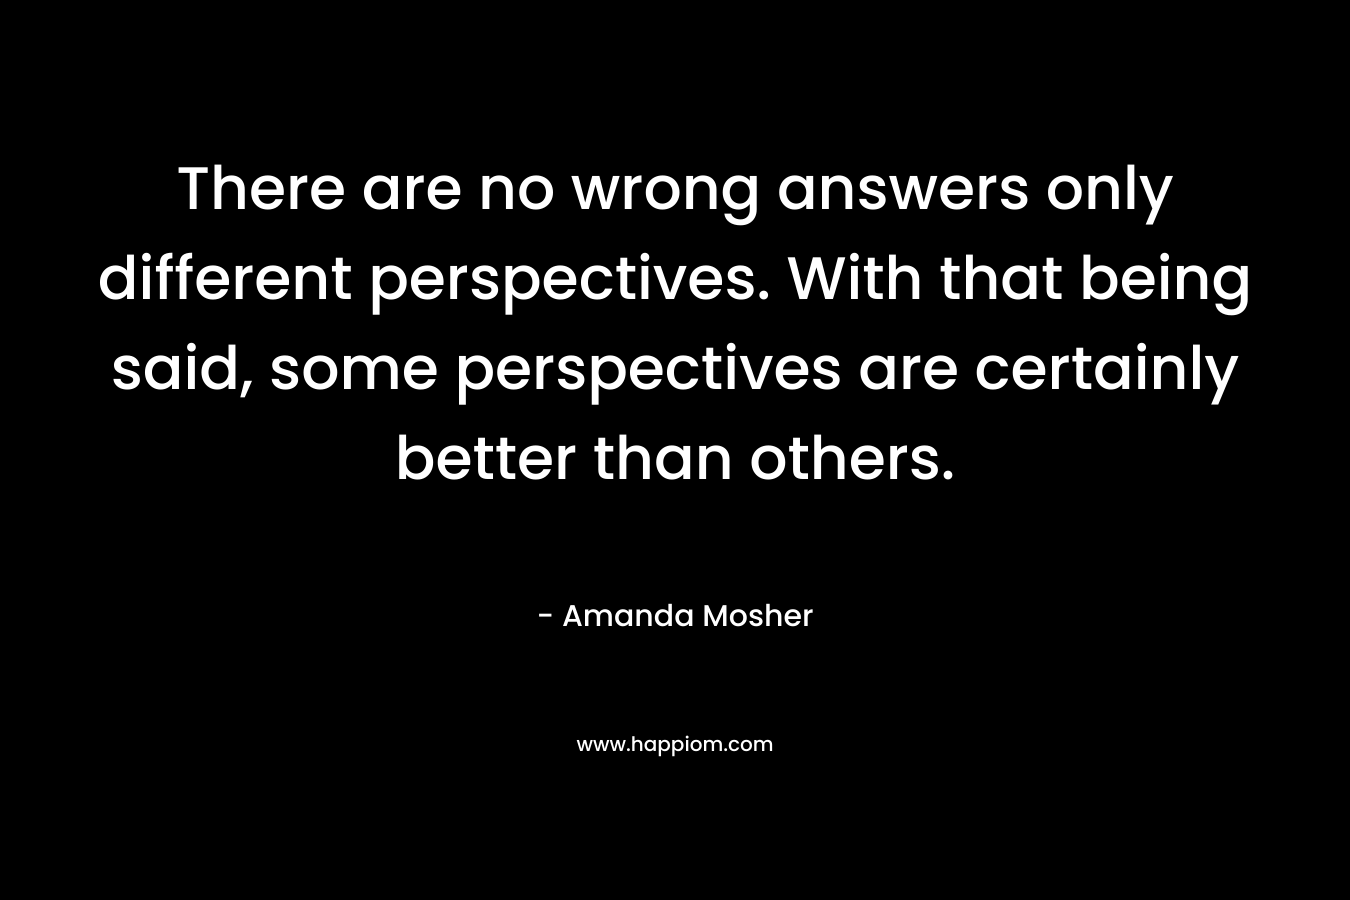 There are no wrong answers only different perspectives. With that being said, some perspectives are certainly better than others. – Amanda Mosher